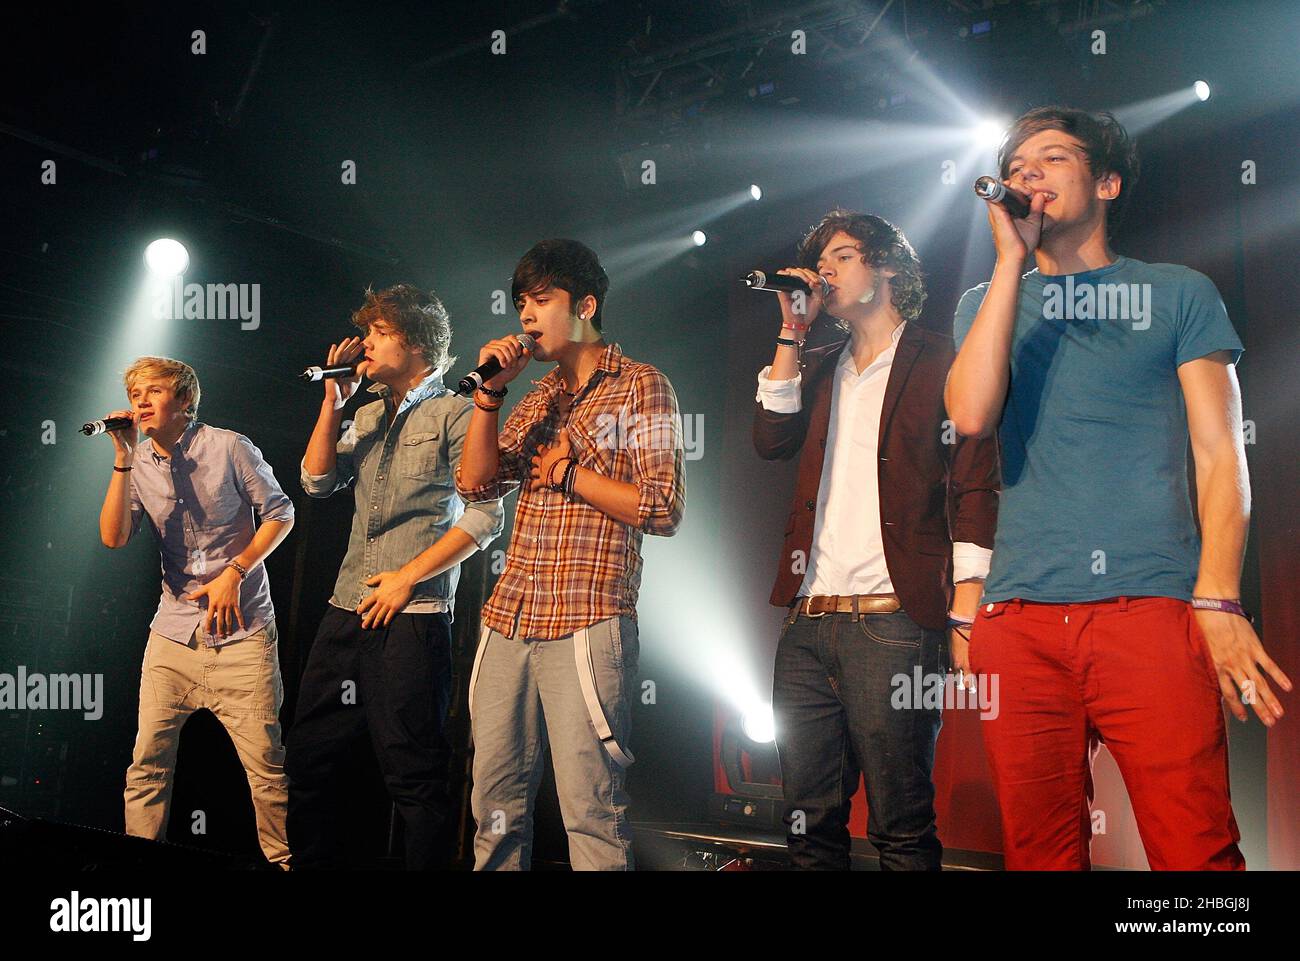 https://c8.alamy.com/comp/2HBGJ8J/niall-horan-liam-payne-zayne-malik-harry-styles-and-louis-tomlinson-of-one-direction-perform-live-at-g-a-y-heaven-in-london-2HBGJ8J.jpg